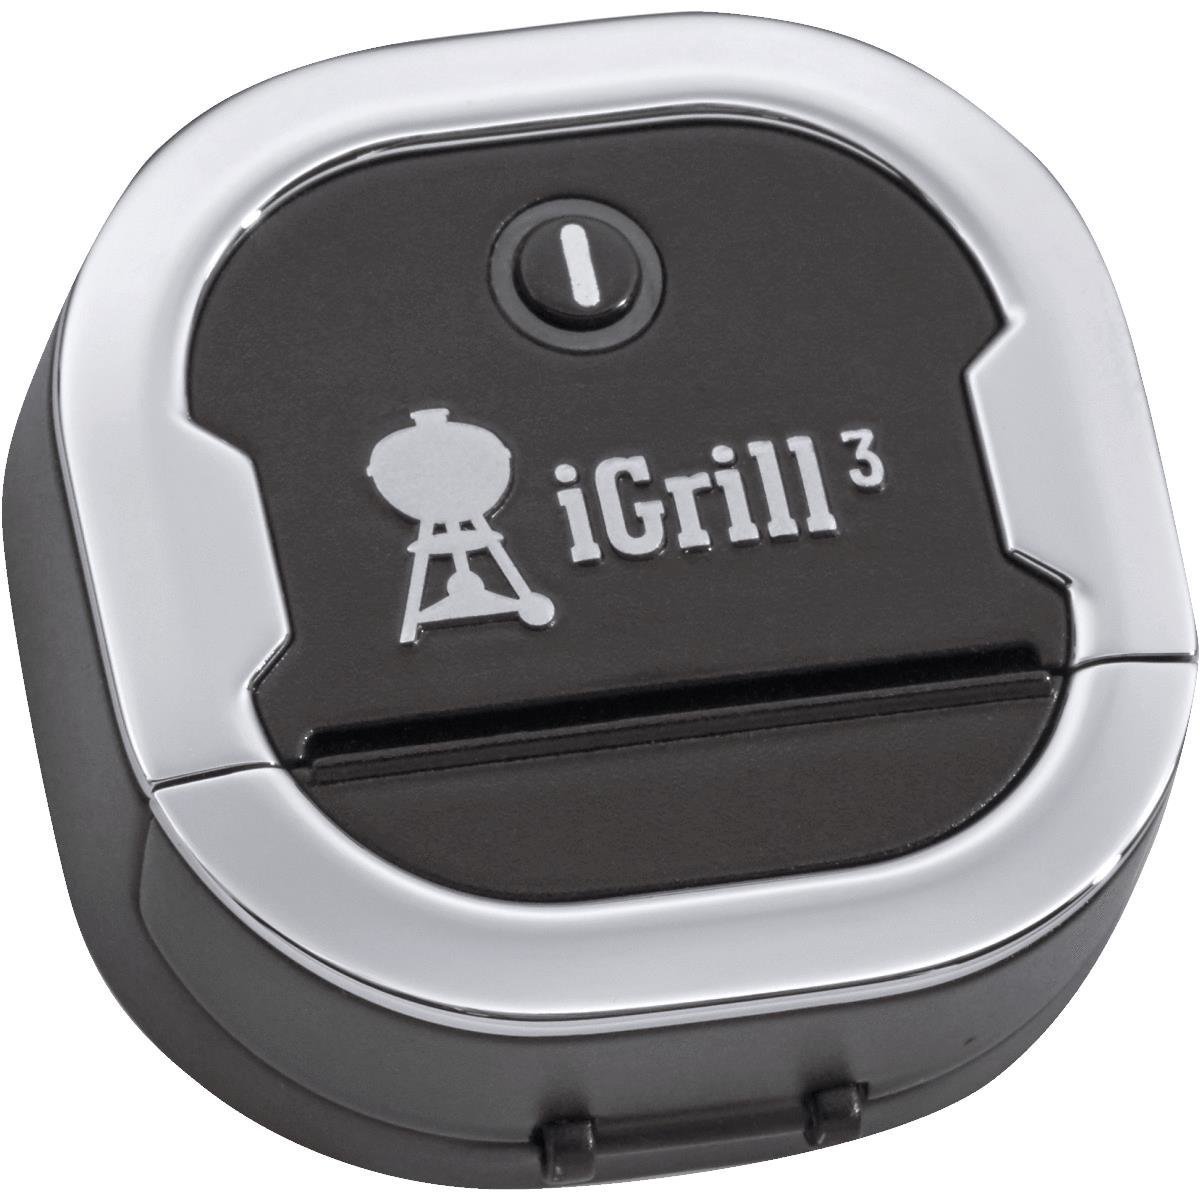 Igrill 3 Review